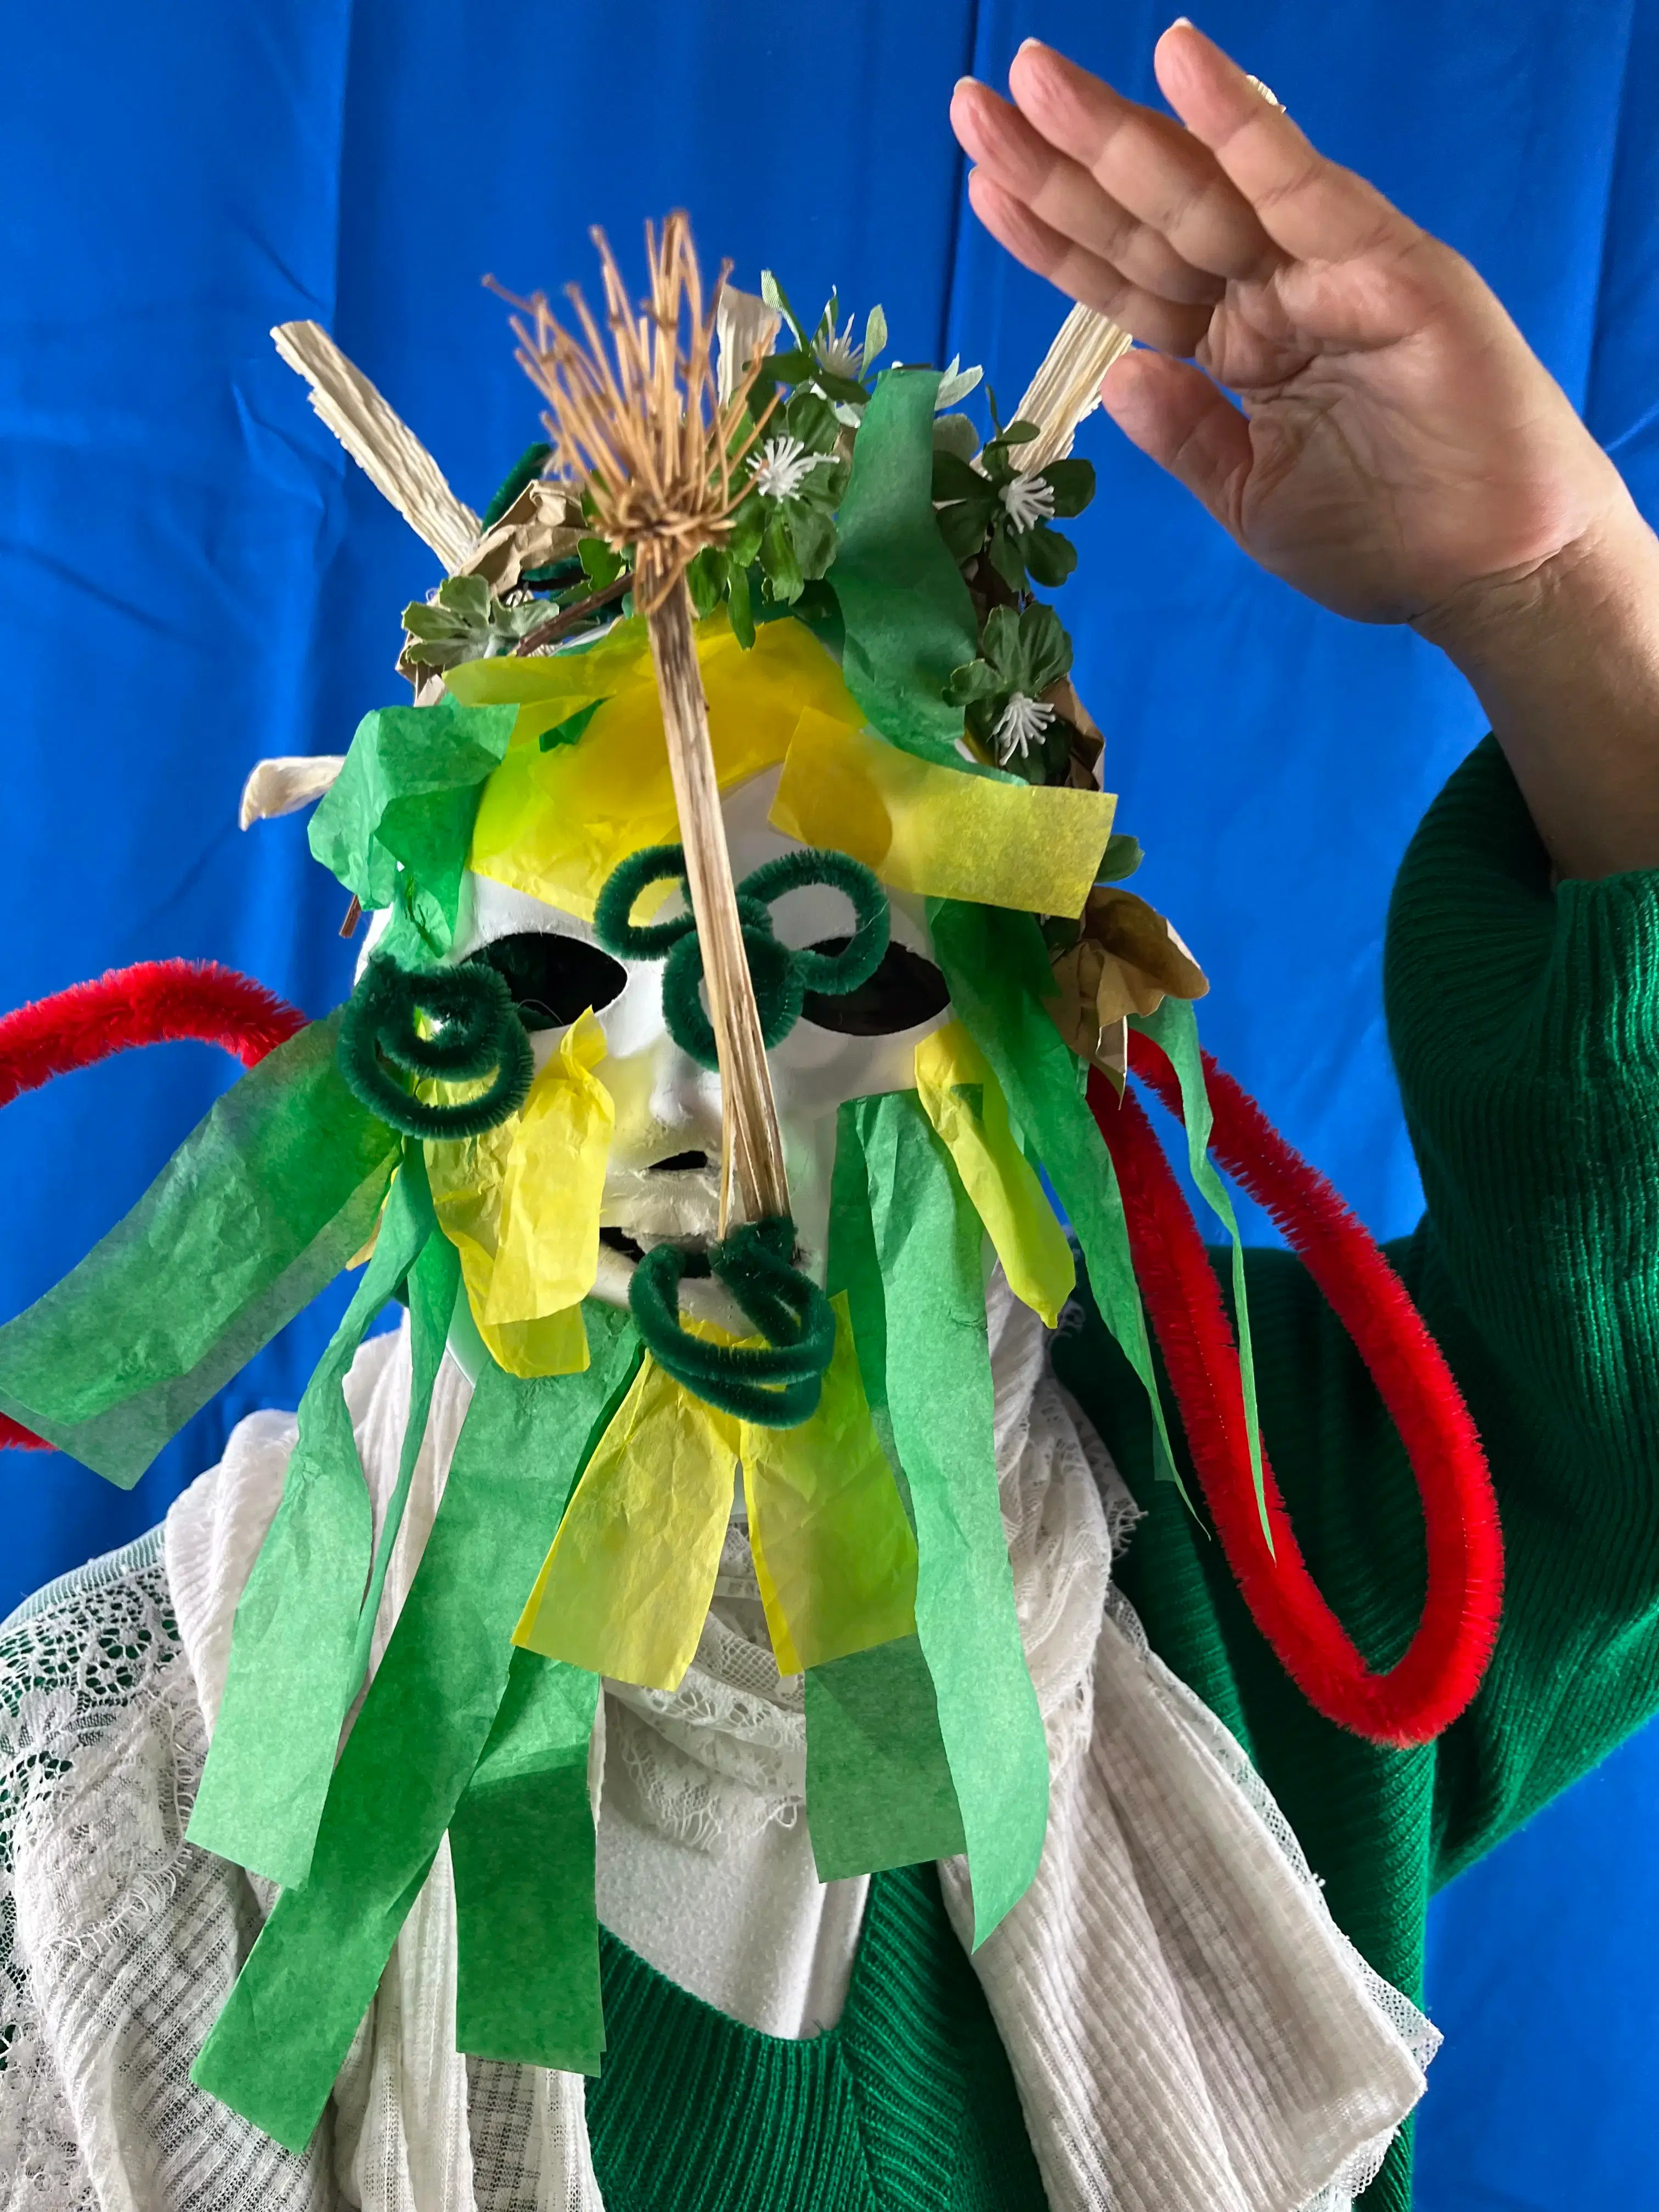 A vibrant handmade mask adorned with colorful paper, textured materials, and natural flora, held by a person against a blue backdrop.